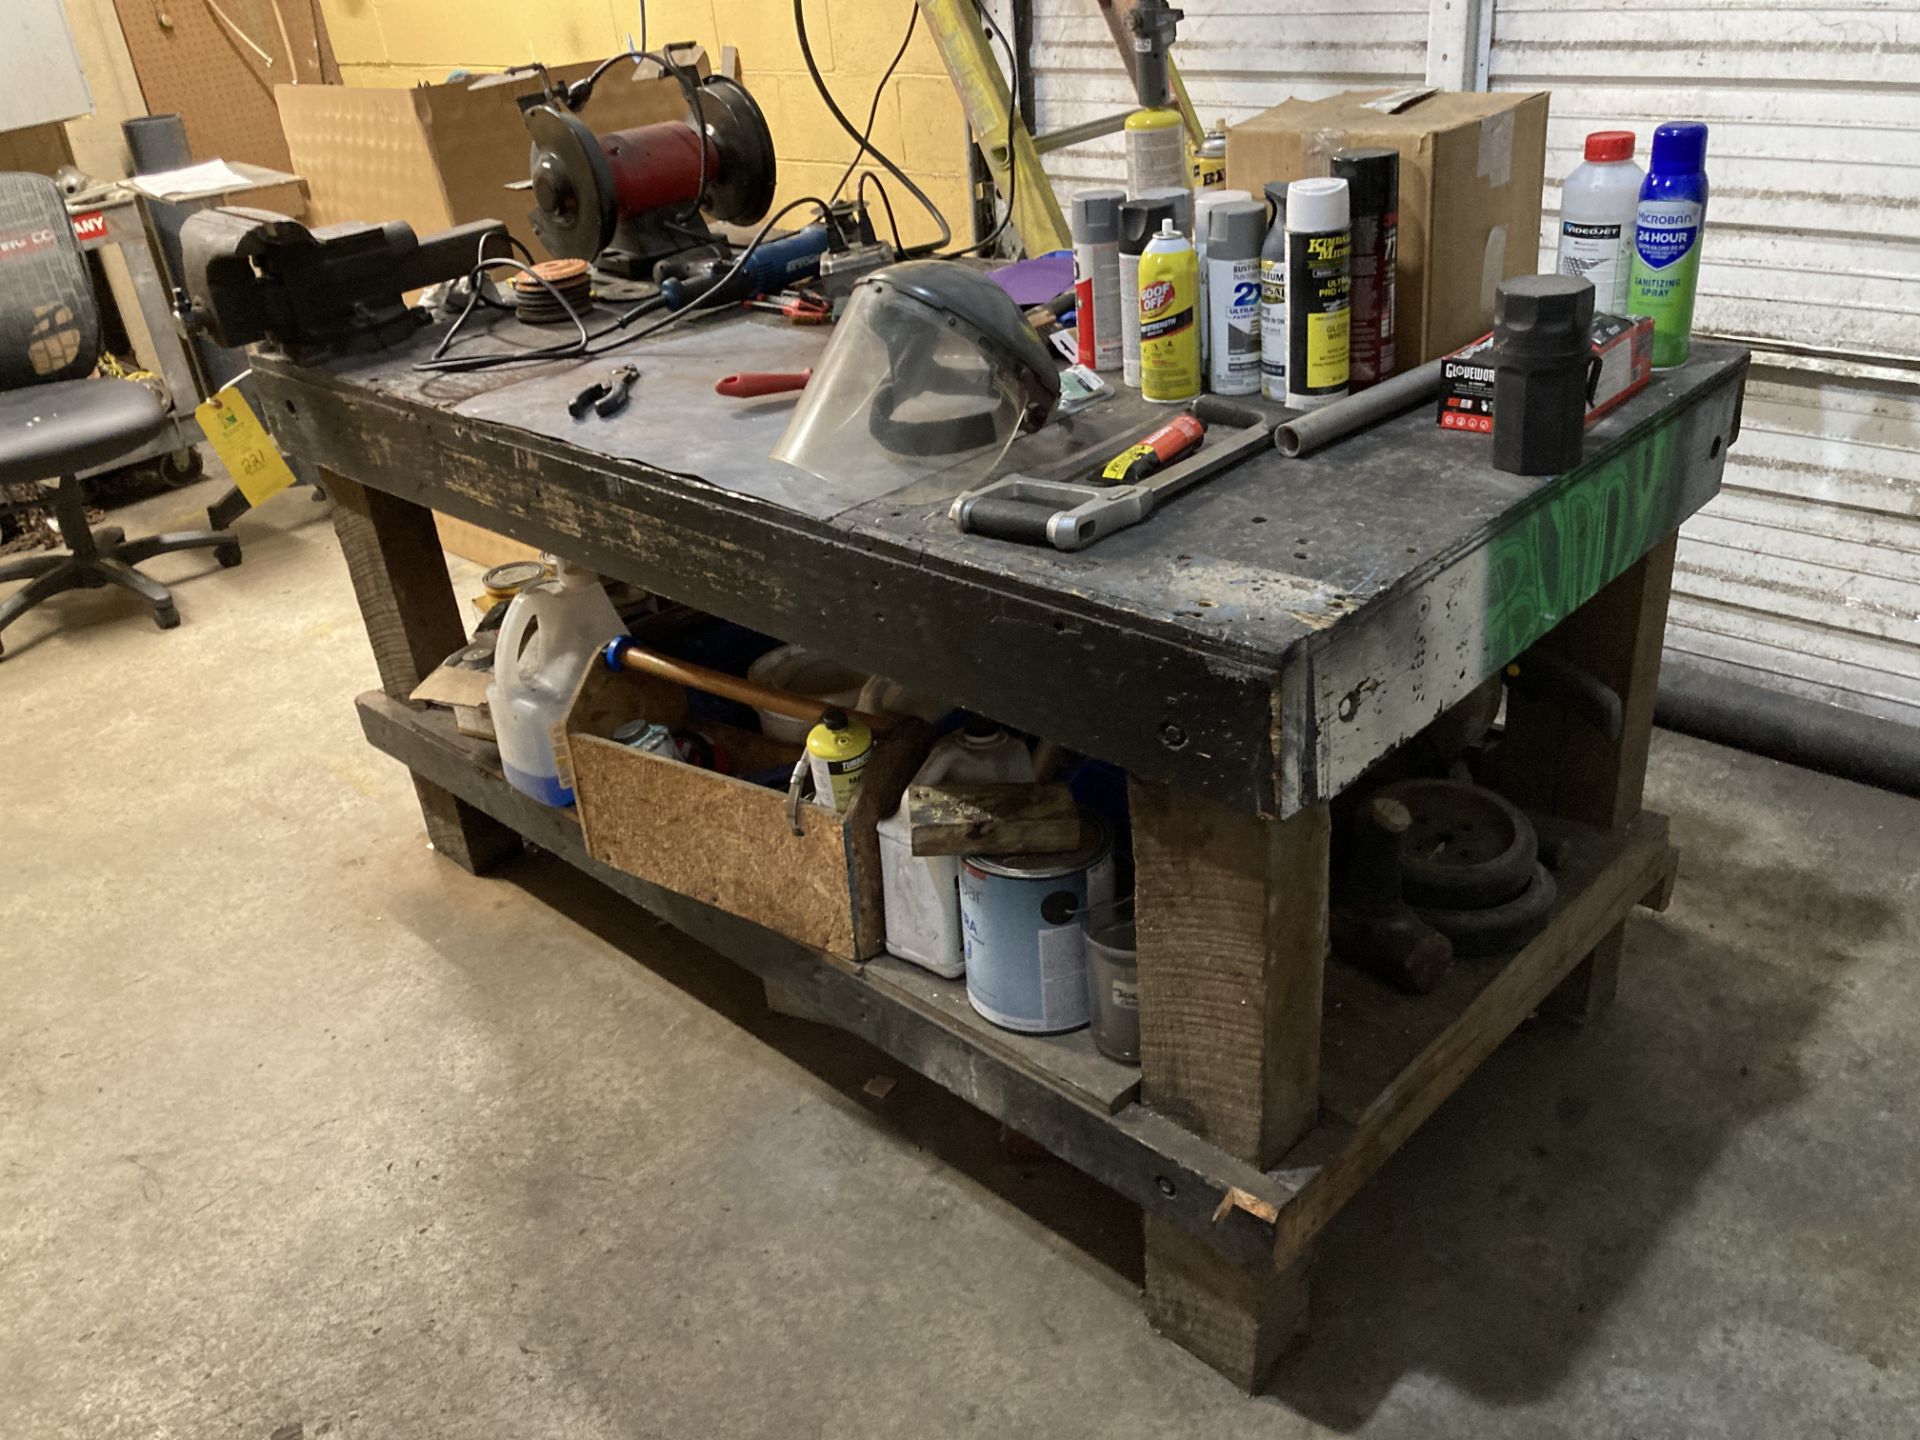 Wood construction work bench with grinder and vise ***Rigging and Loading Fee of$: TBD will be